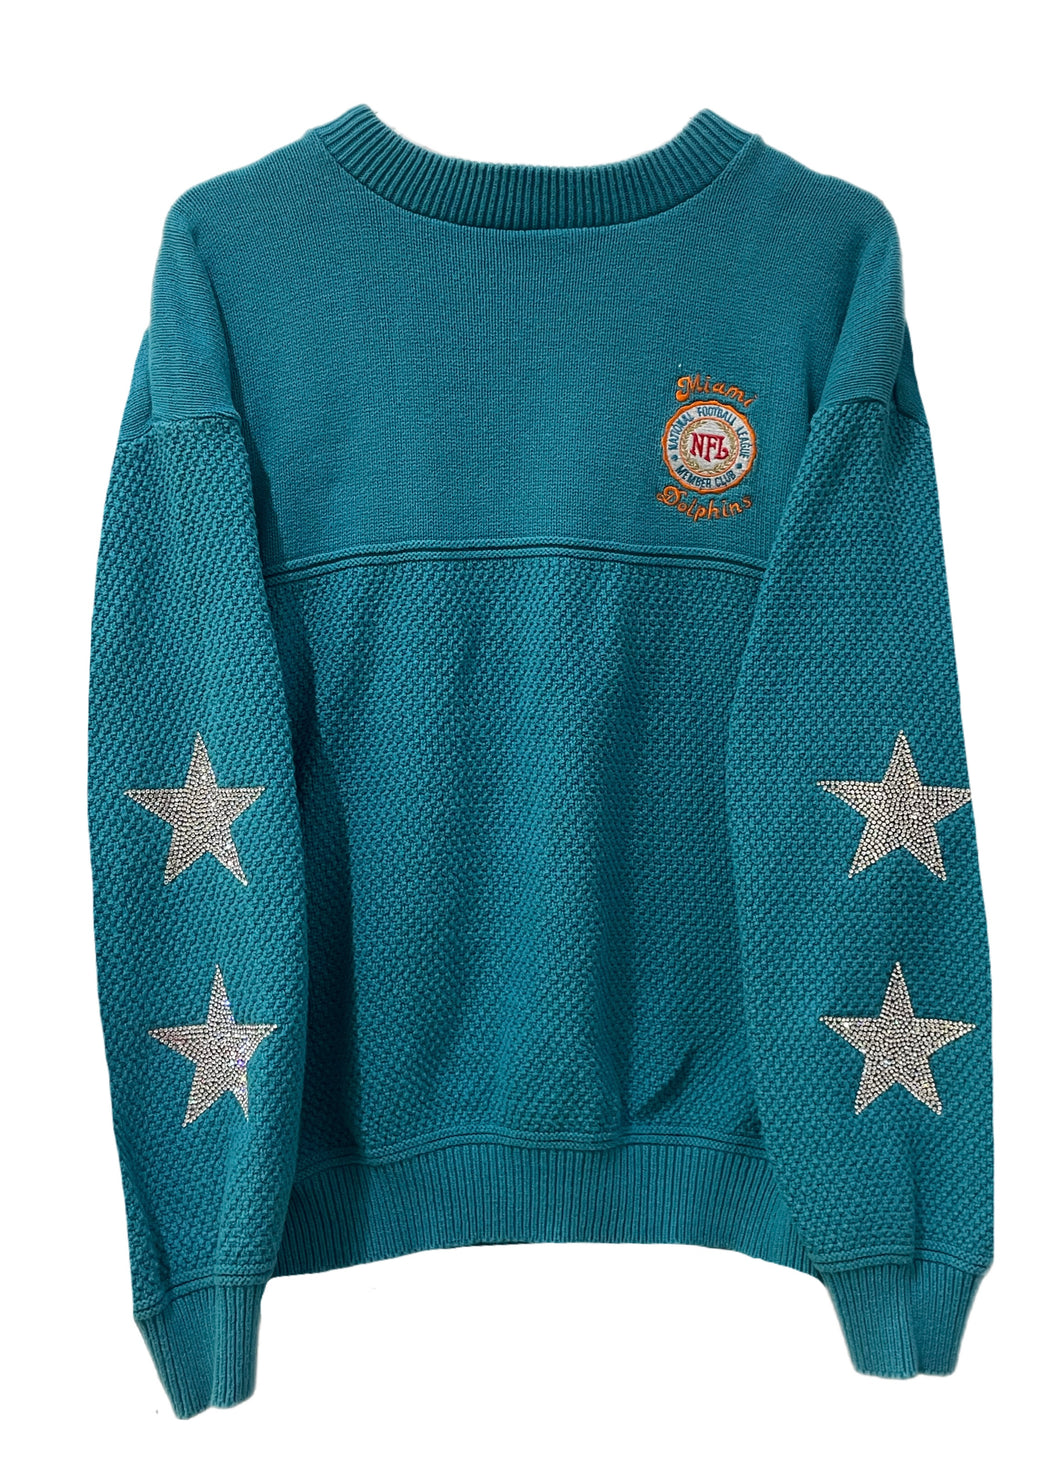 Miami Dolphins, NFL One of a KIND Vintage Knit Sweatshirt with Crystal Star Design